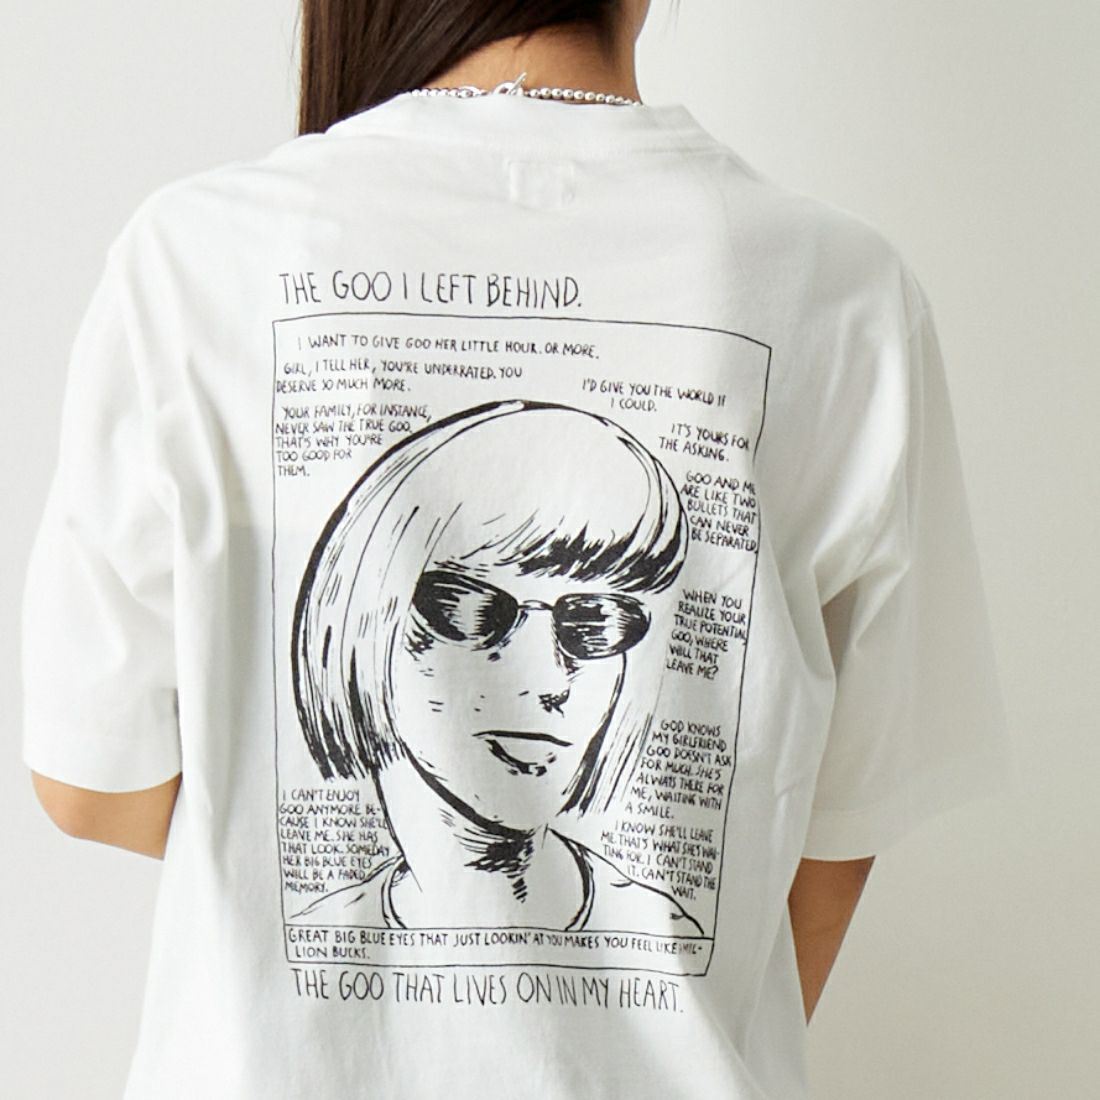 blurhms ROOTSTOCK [ブラームス ルーツストック] Echo スタンダードプリントTシャツ [BROOTS24S33SONIC1] 01 WHITE